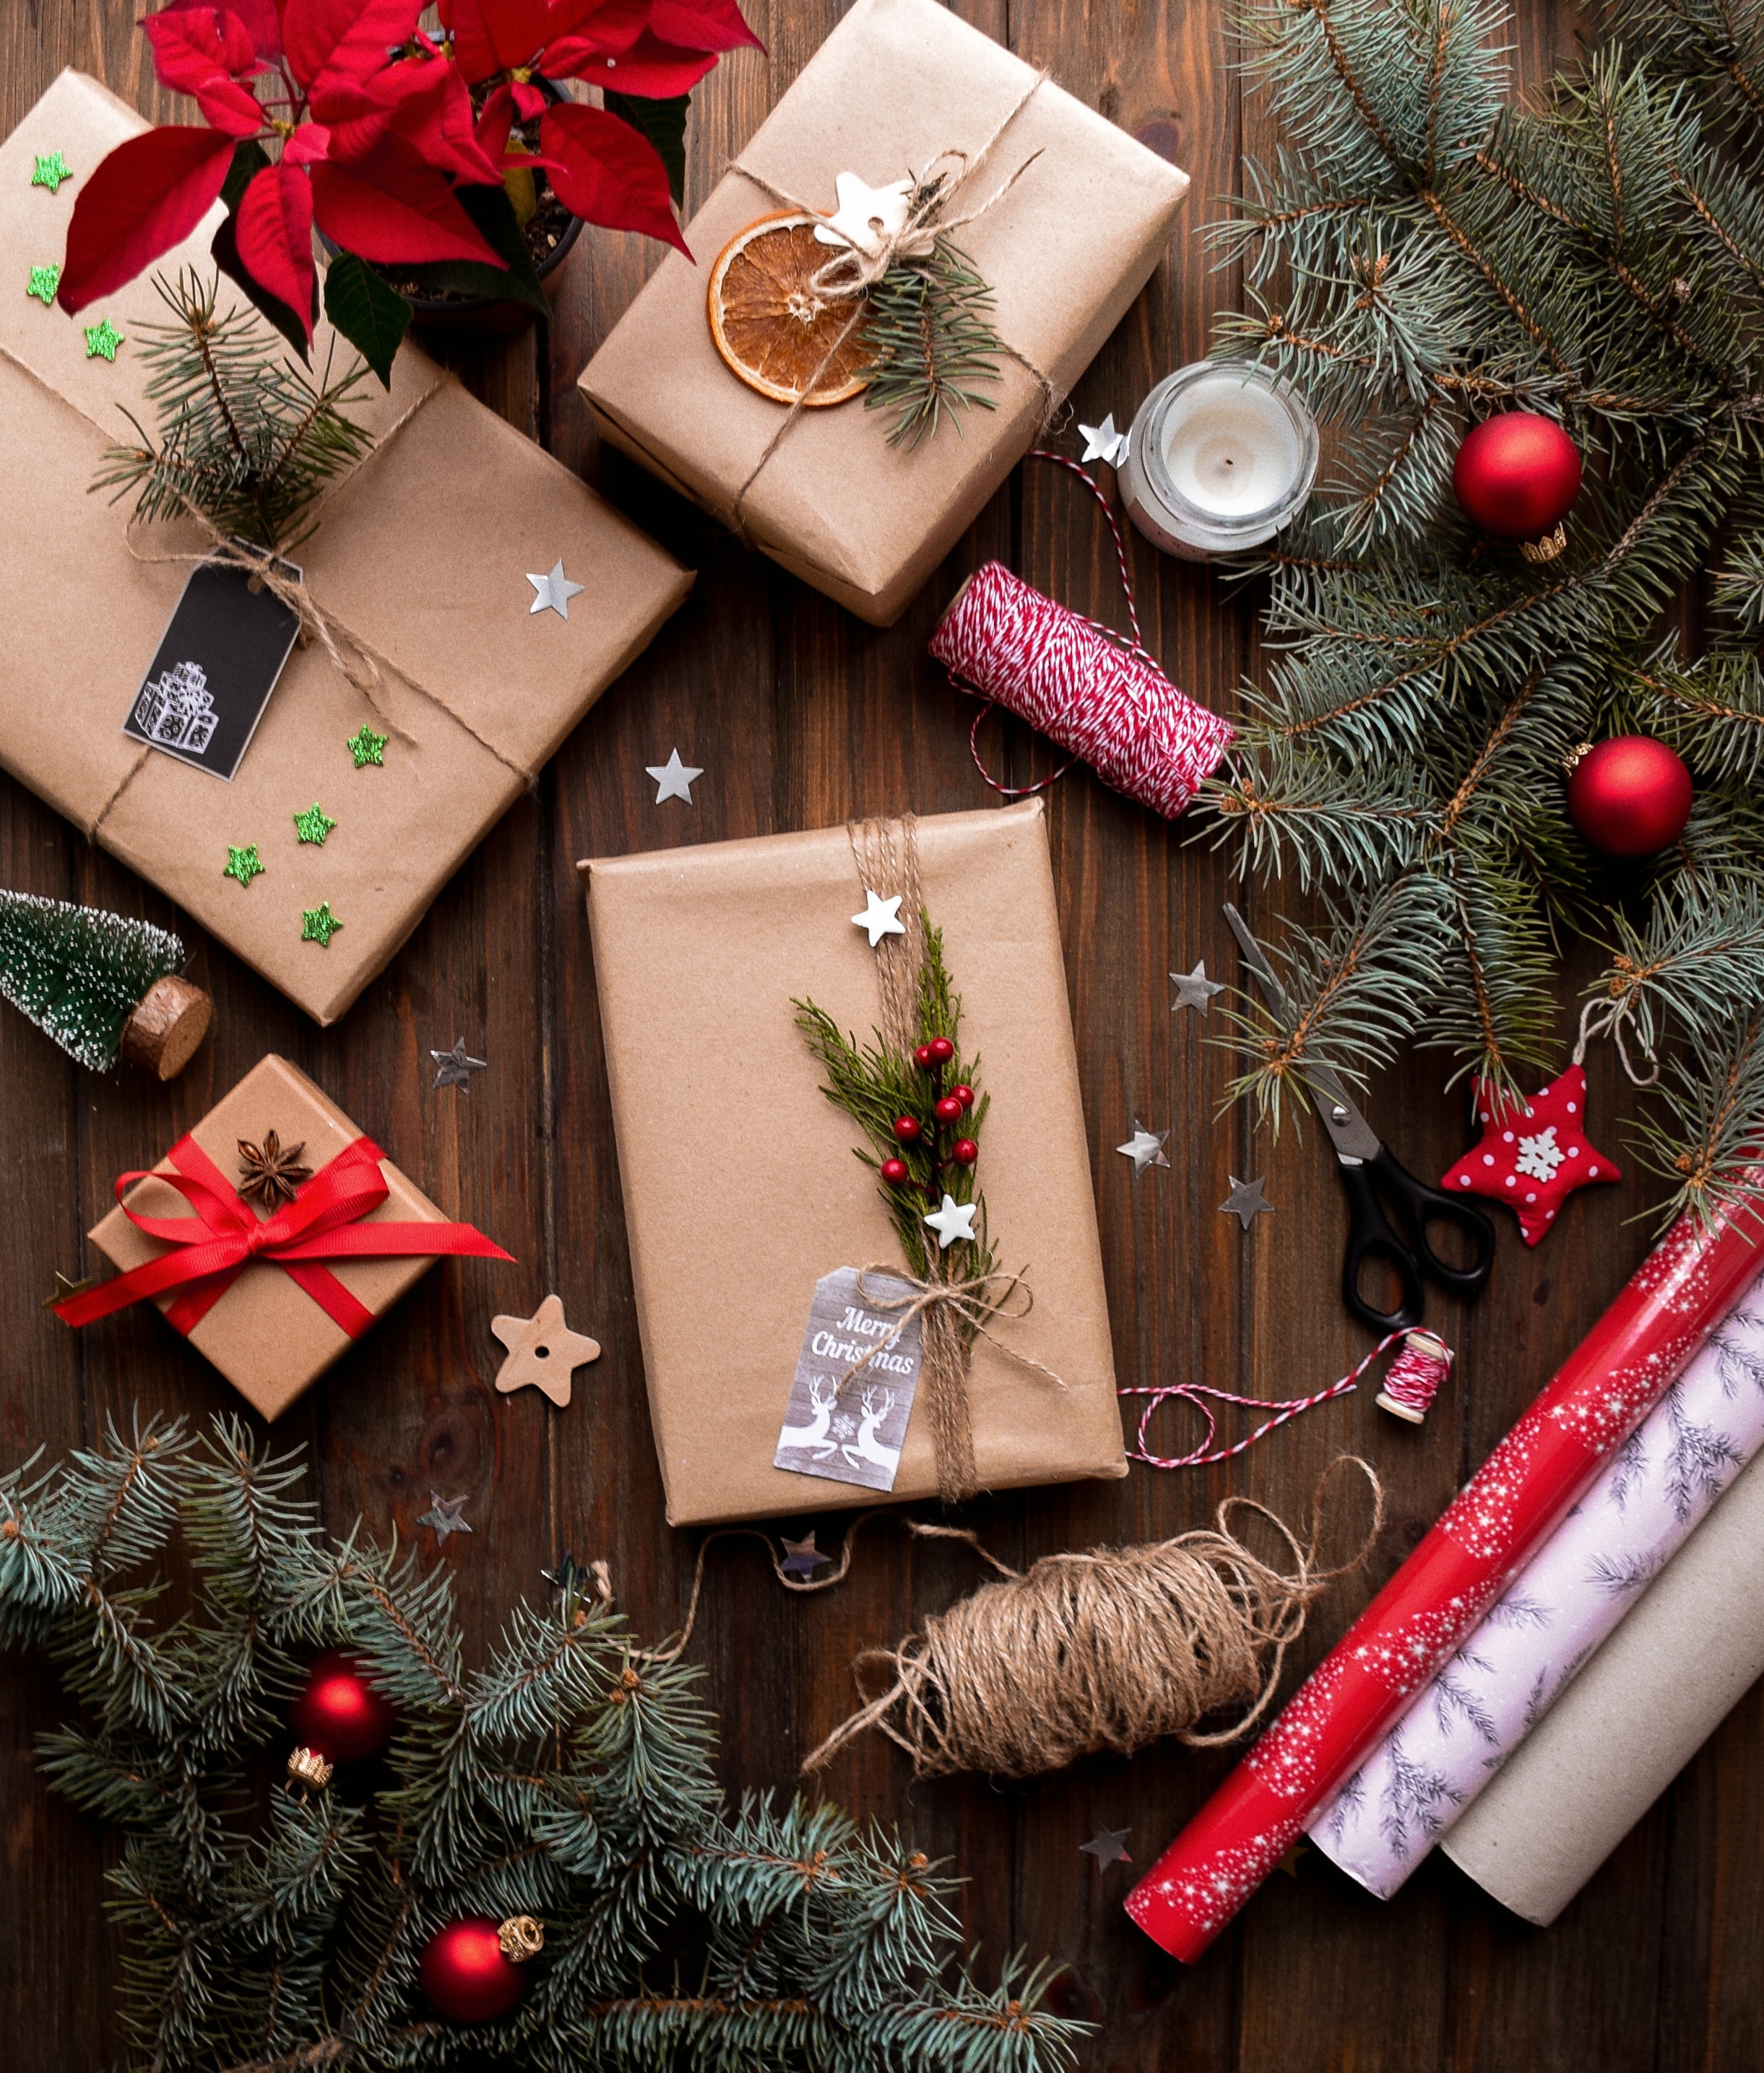 The 12 Gifts of Christmas 